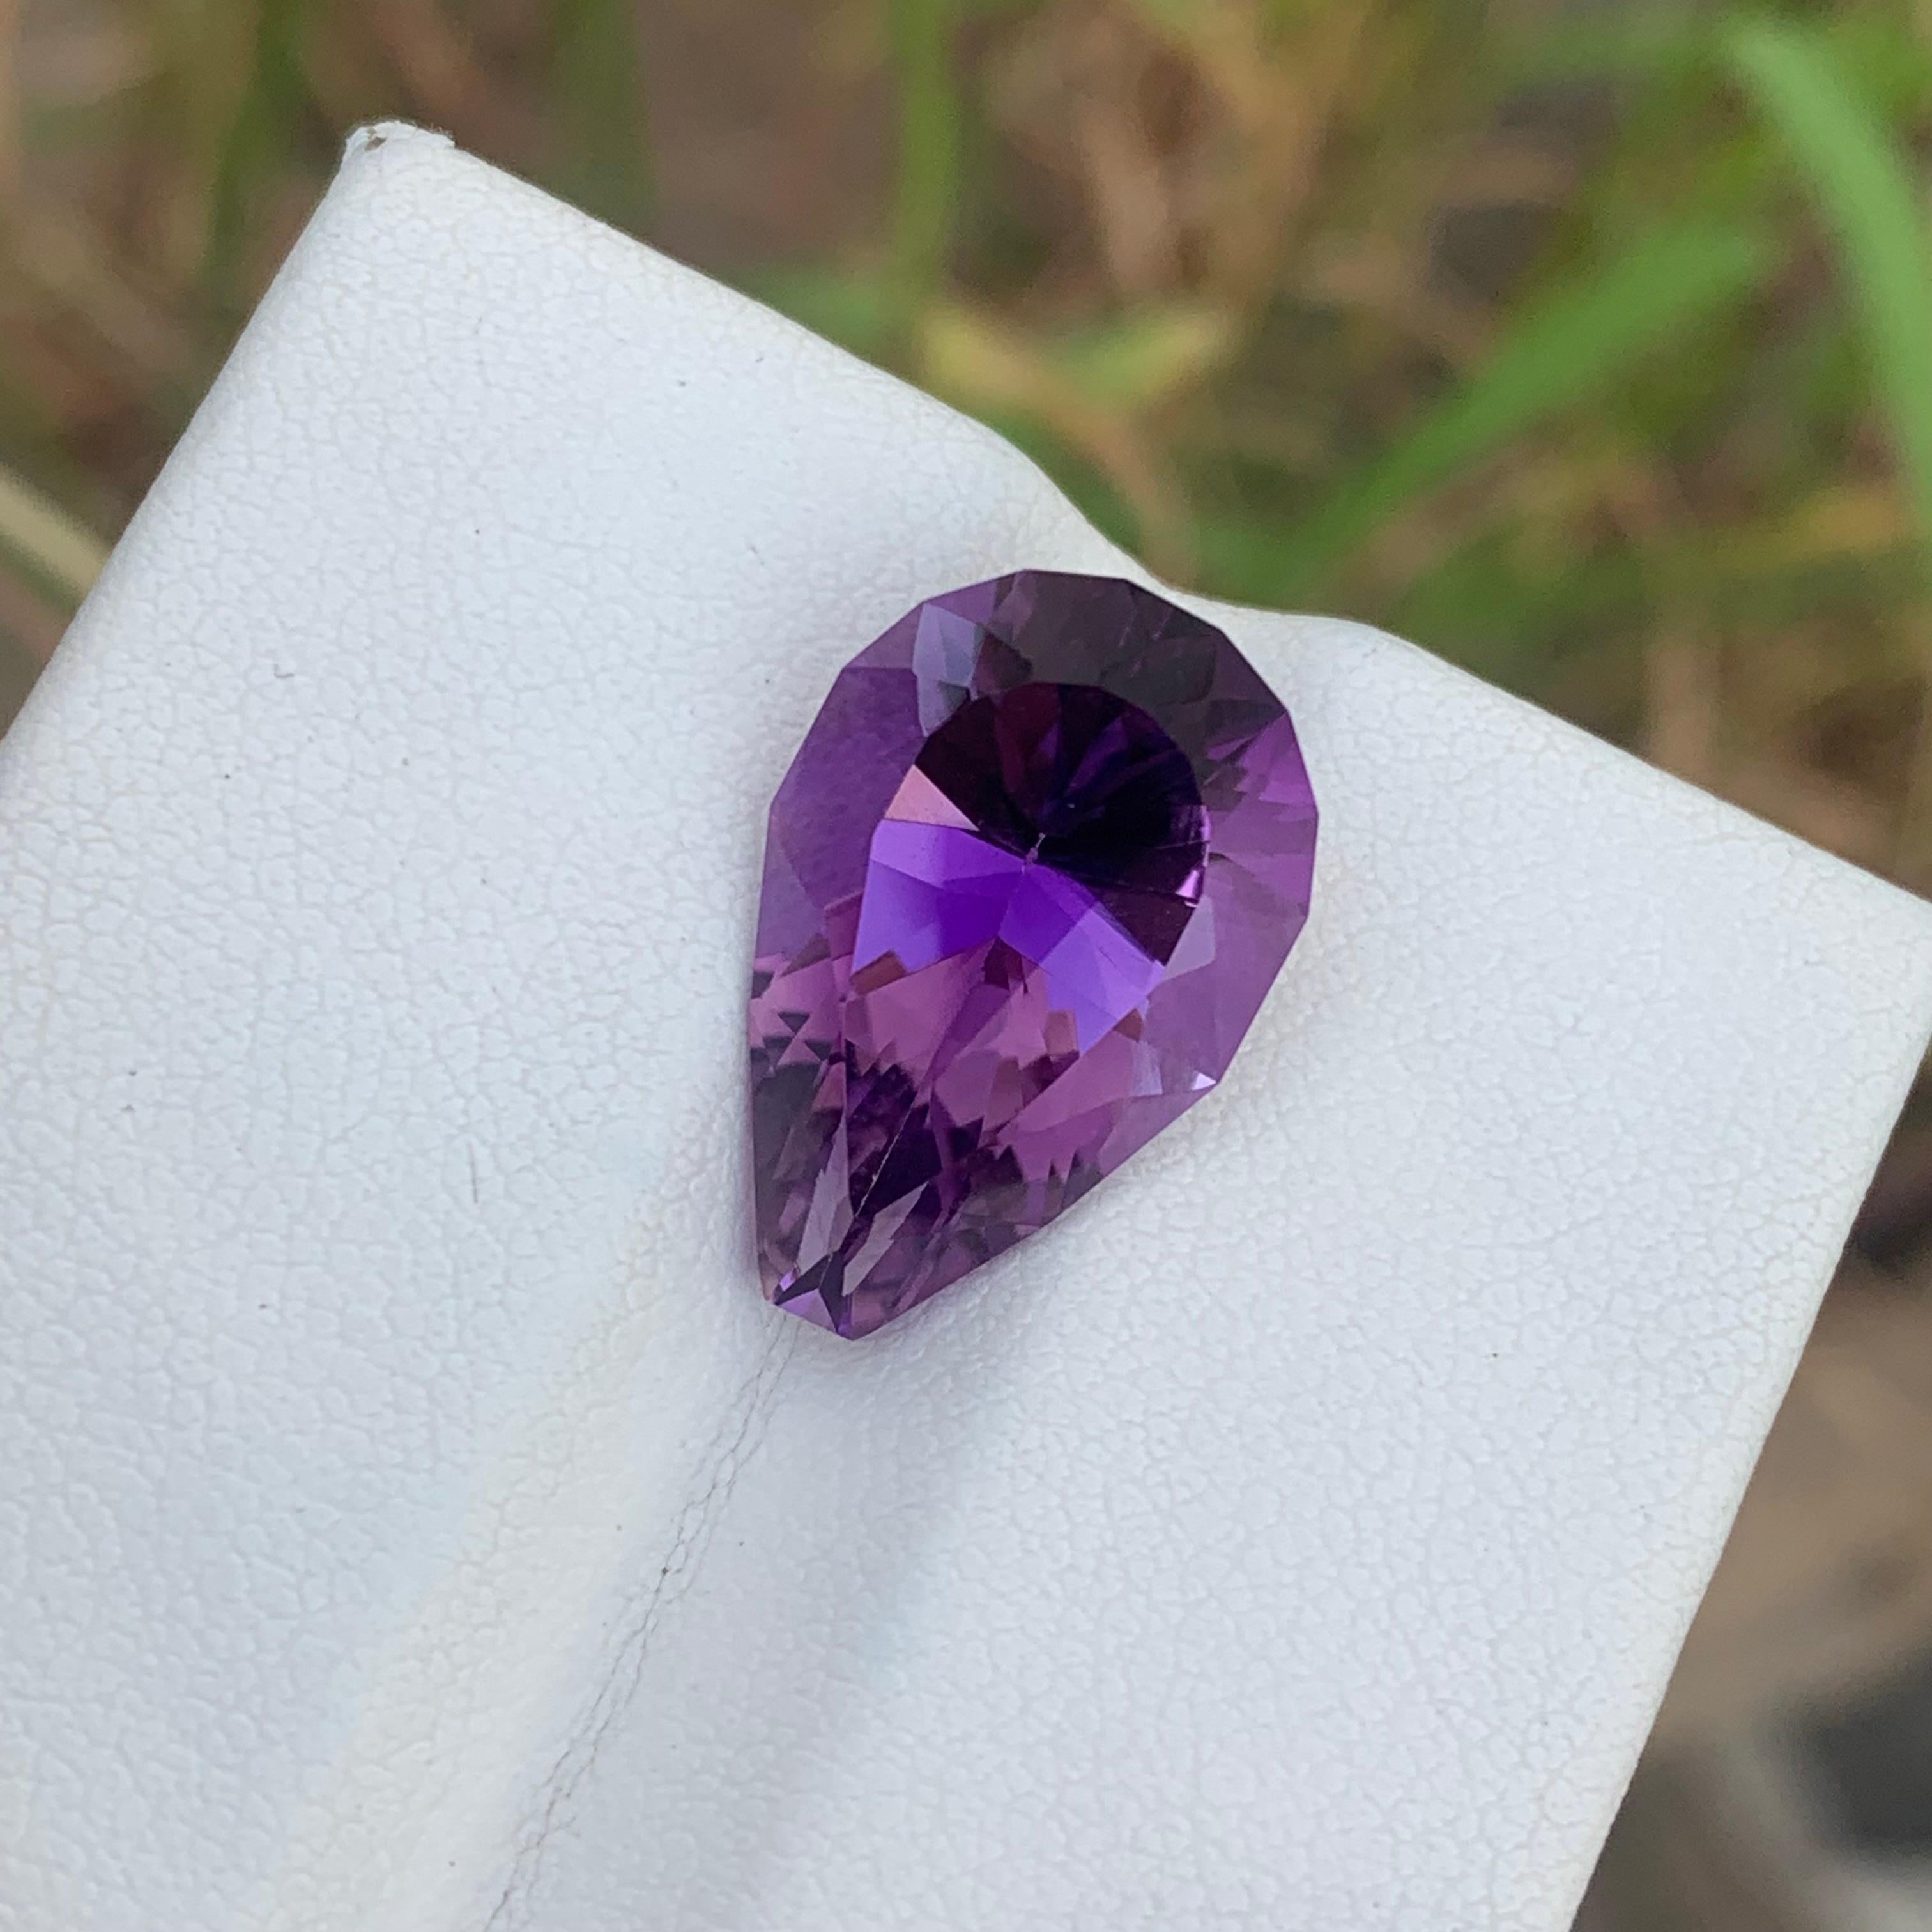 Loose Amethyst 
Weight: 7.90 Carats 
Dimension: 17.8x11.5x8.5 Mm 
Origin: Brazil
Shape: Pear
Color: Purple
Treatment: Non
Certificate: On Demand
Amethyst is a stunning and revered gemstone known for its regal purple color and a history that spans